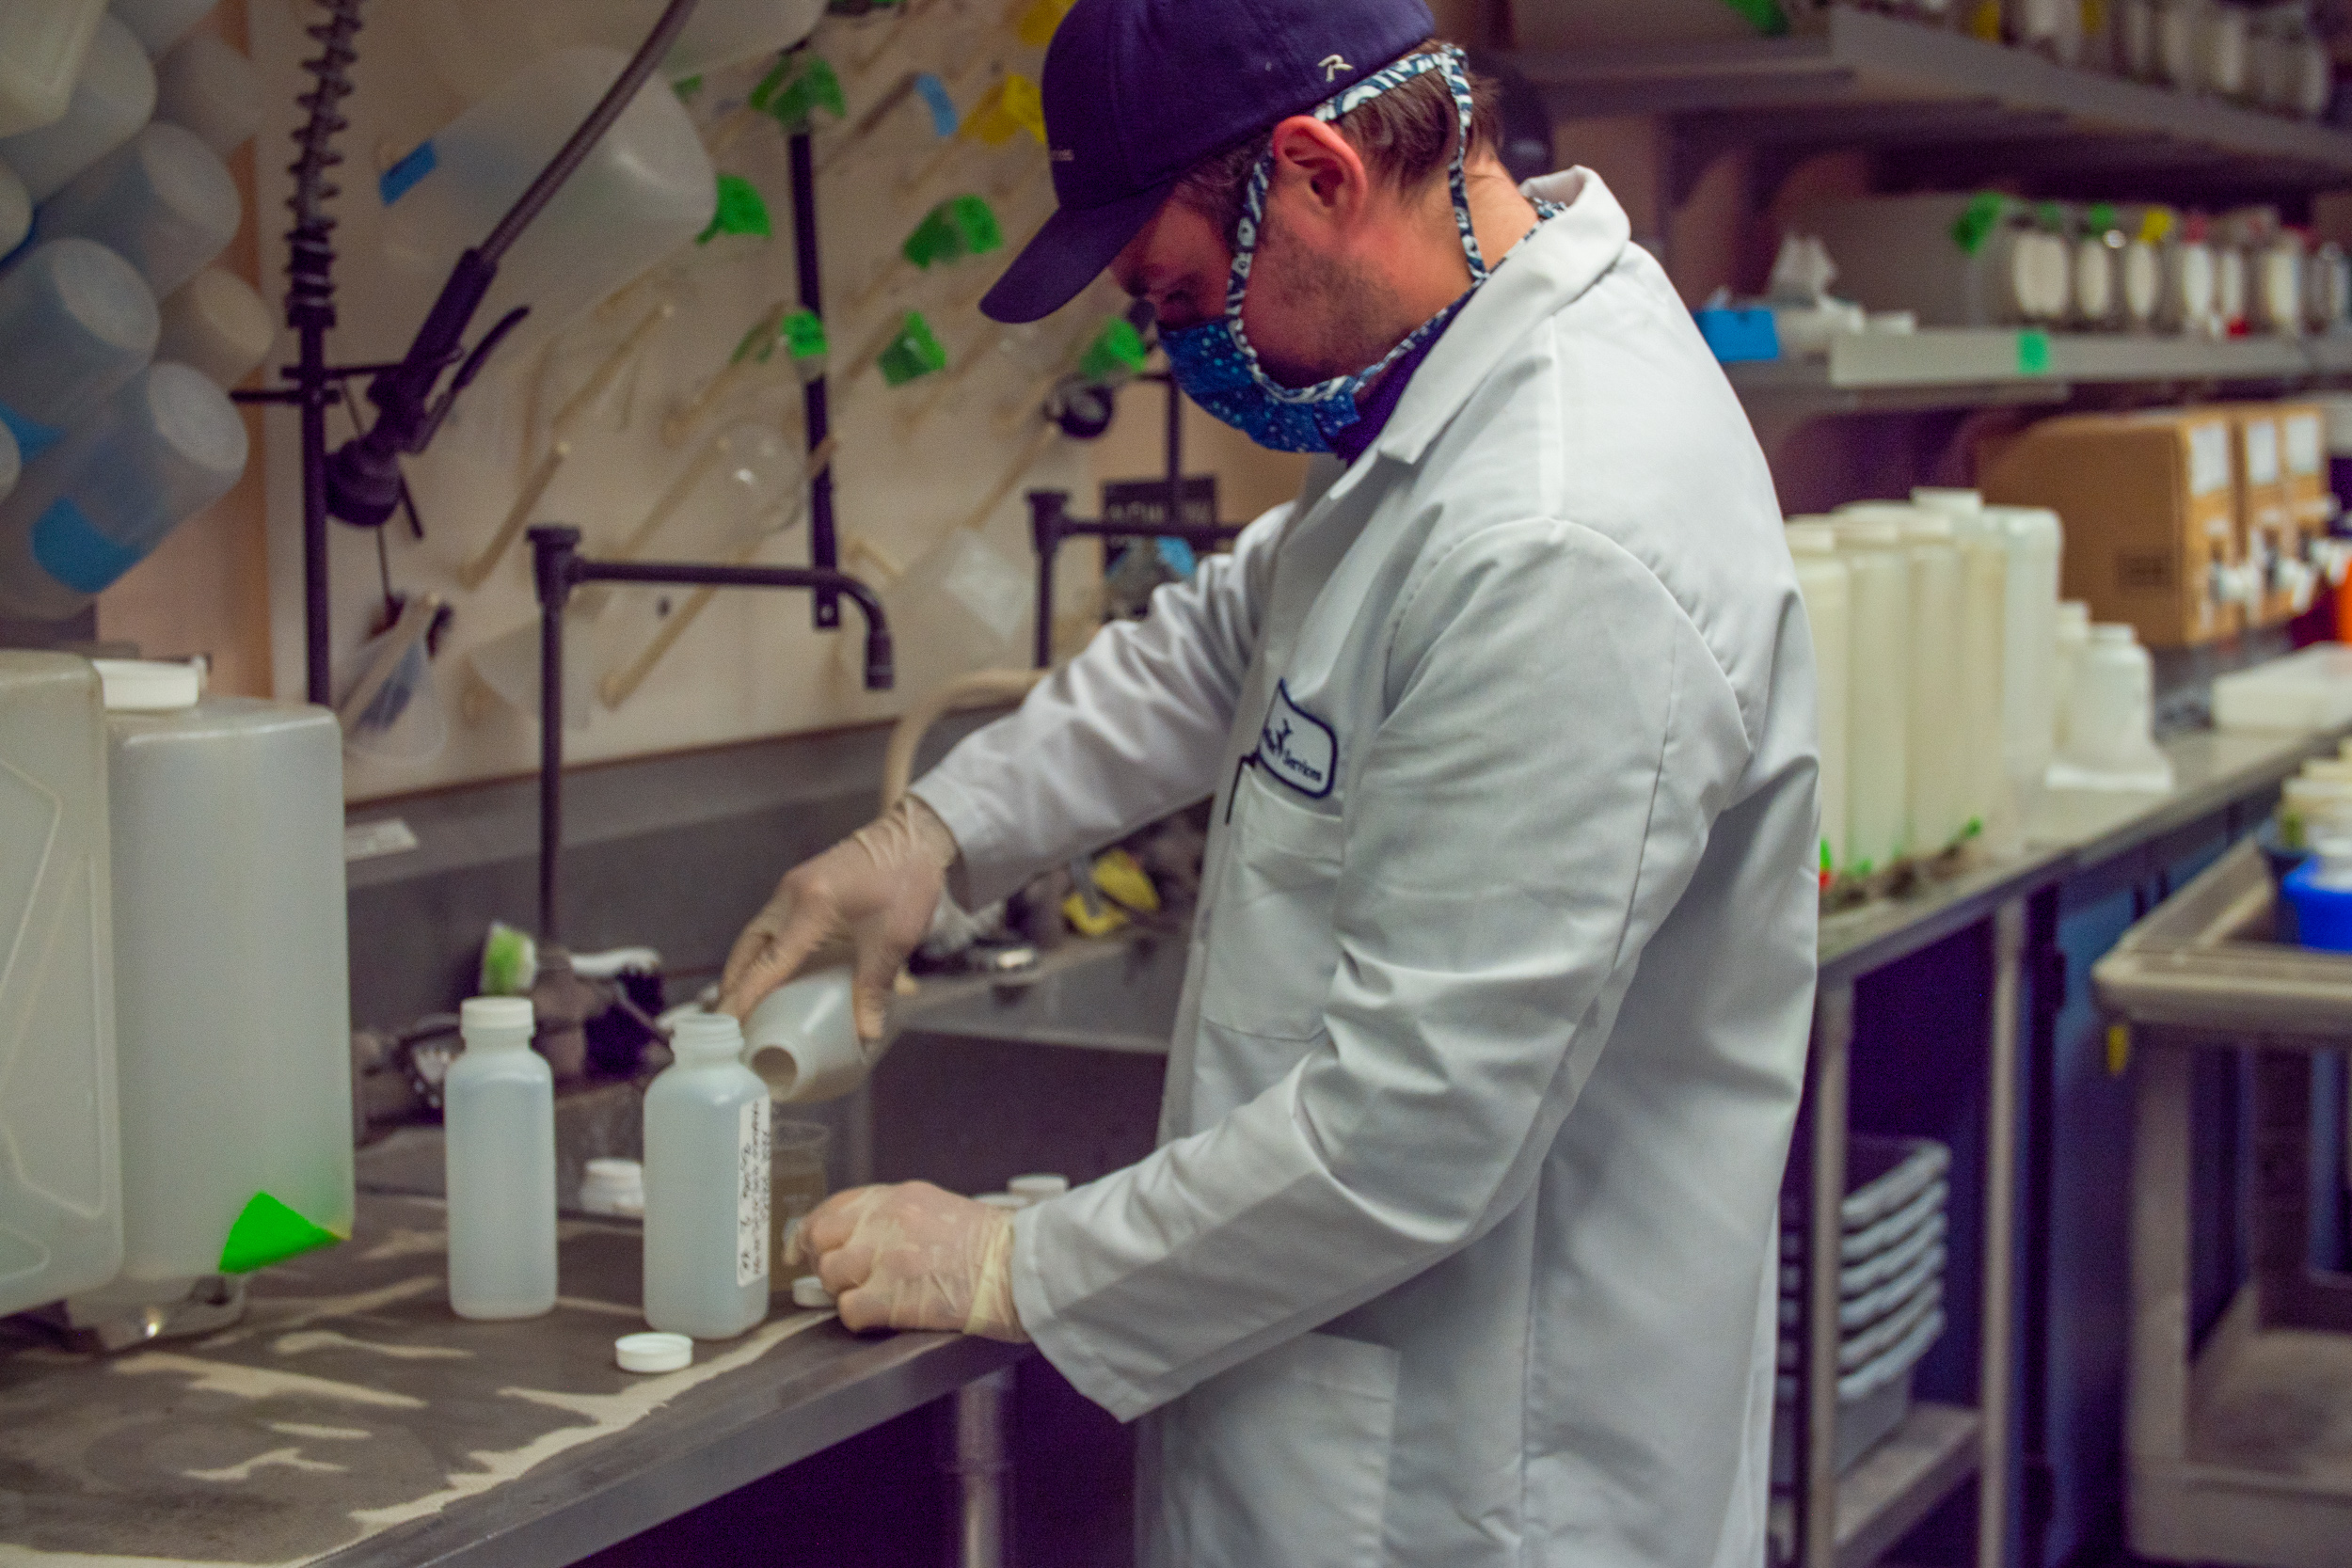 A Clean Water Services employee working in the lab. The employee wears a white lab coat, a protective mask, gloves, and a baseball cap. He pours liquid into a glass beaker